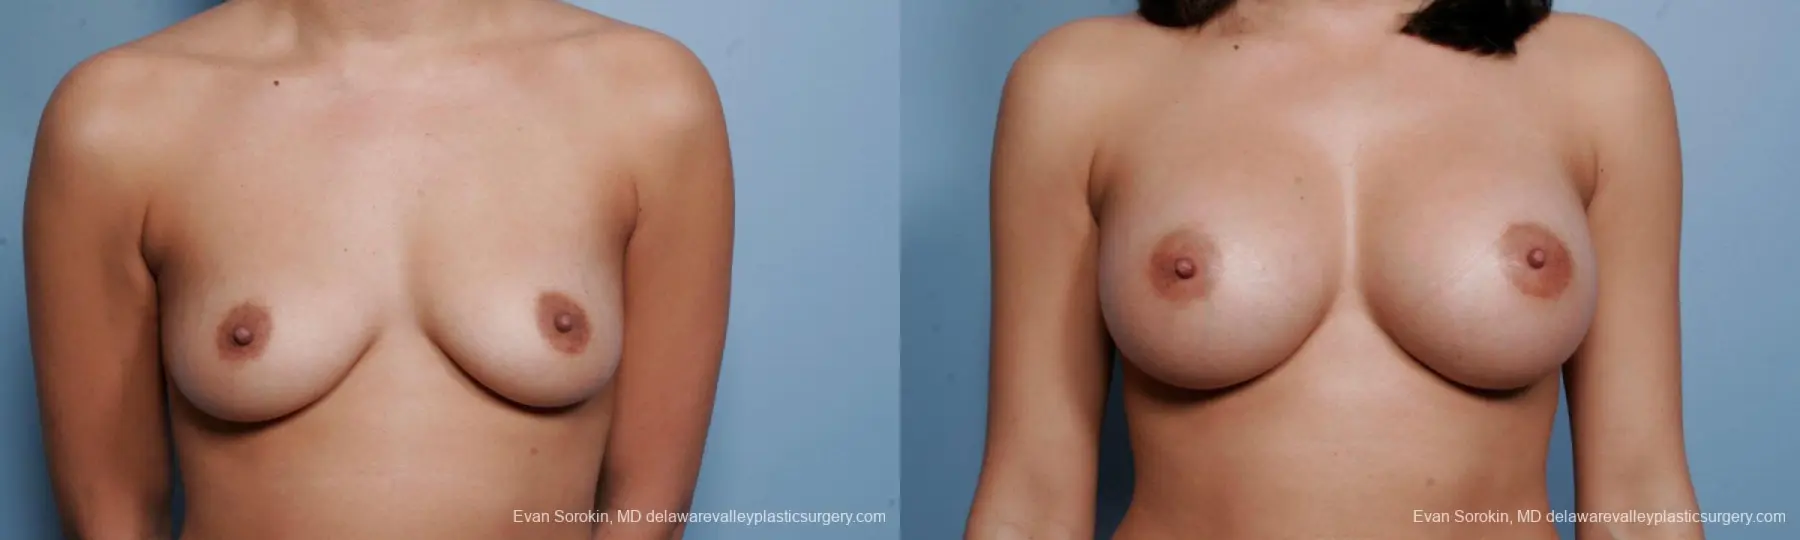 Philadelphia Breast Augmentation 9373 - Before and After